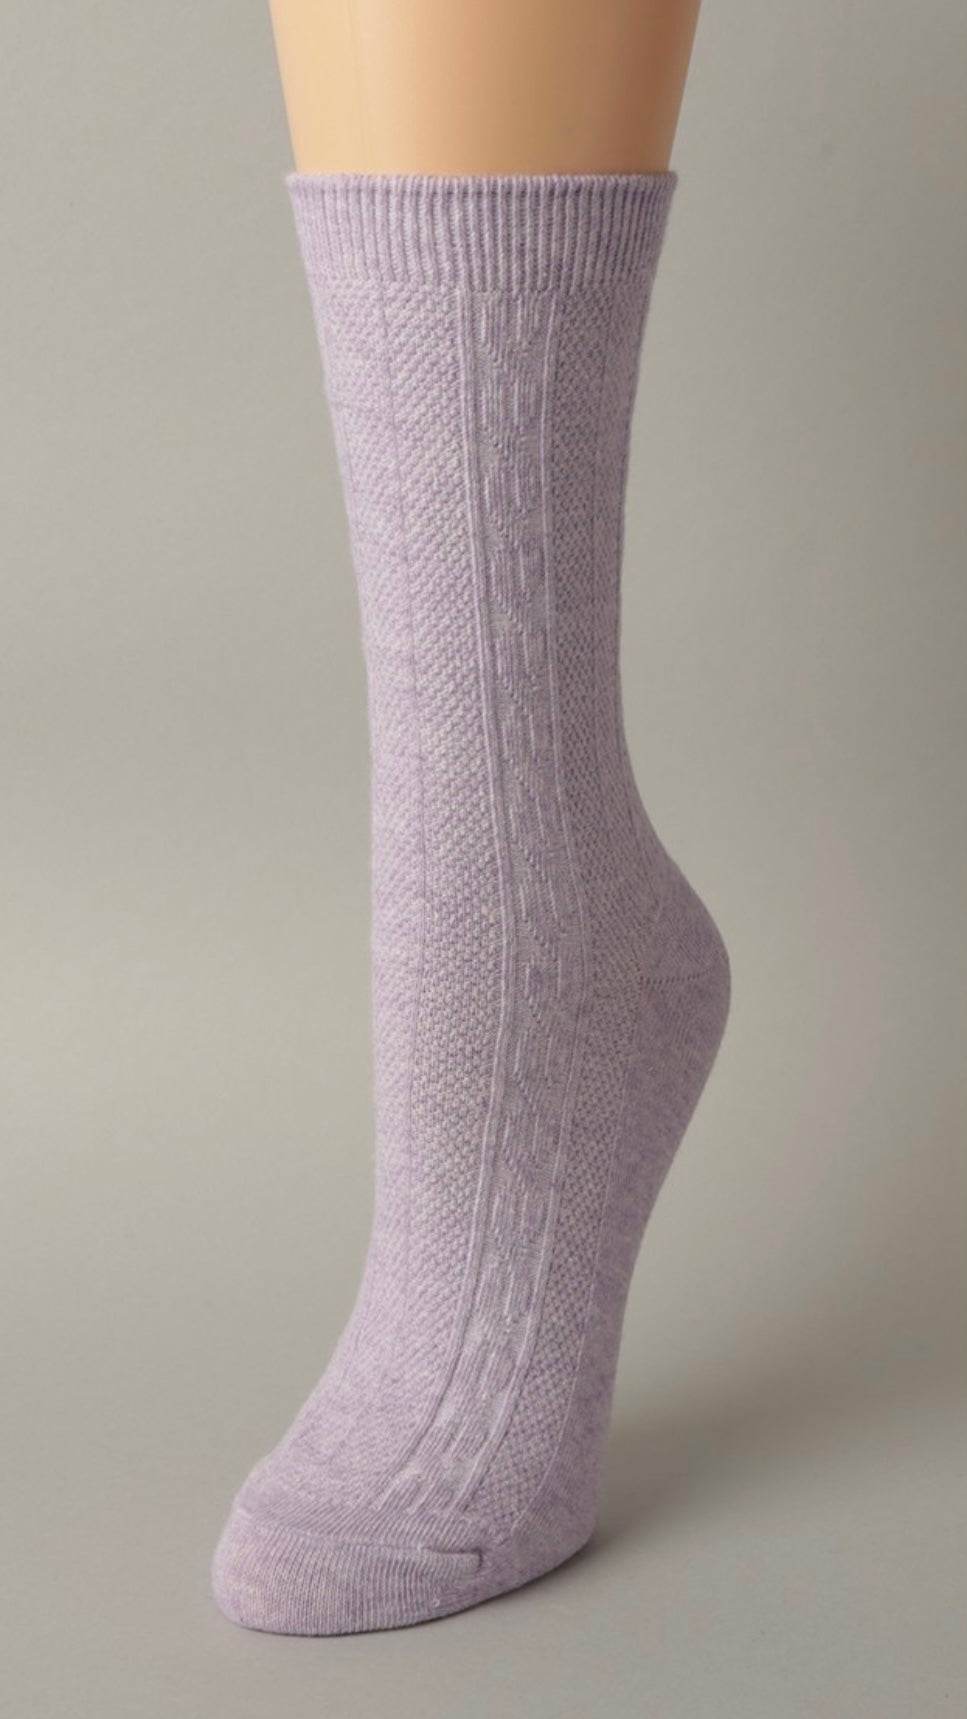 Women’s Cable Knit Crew Length Socks